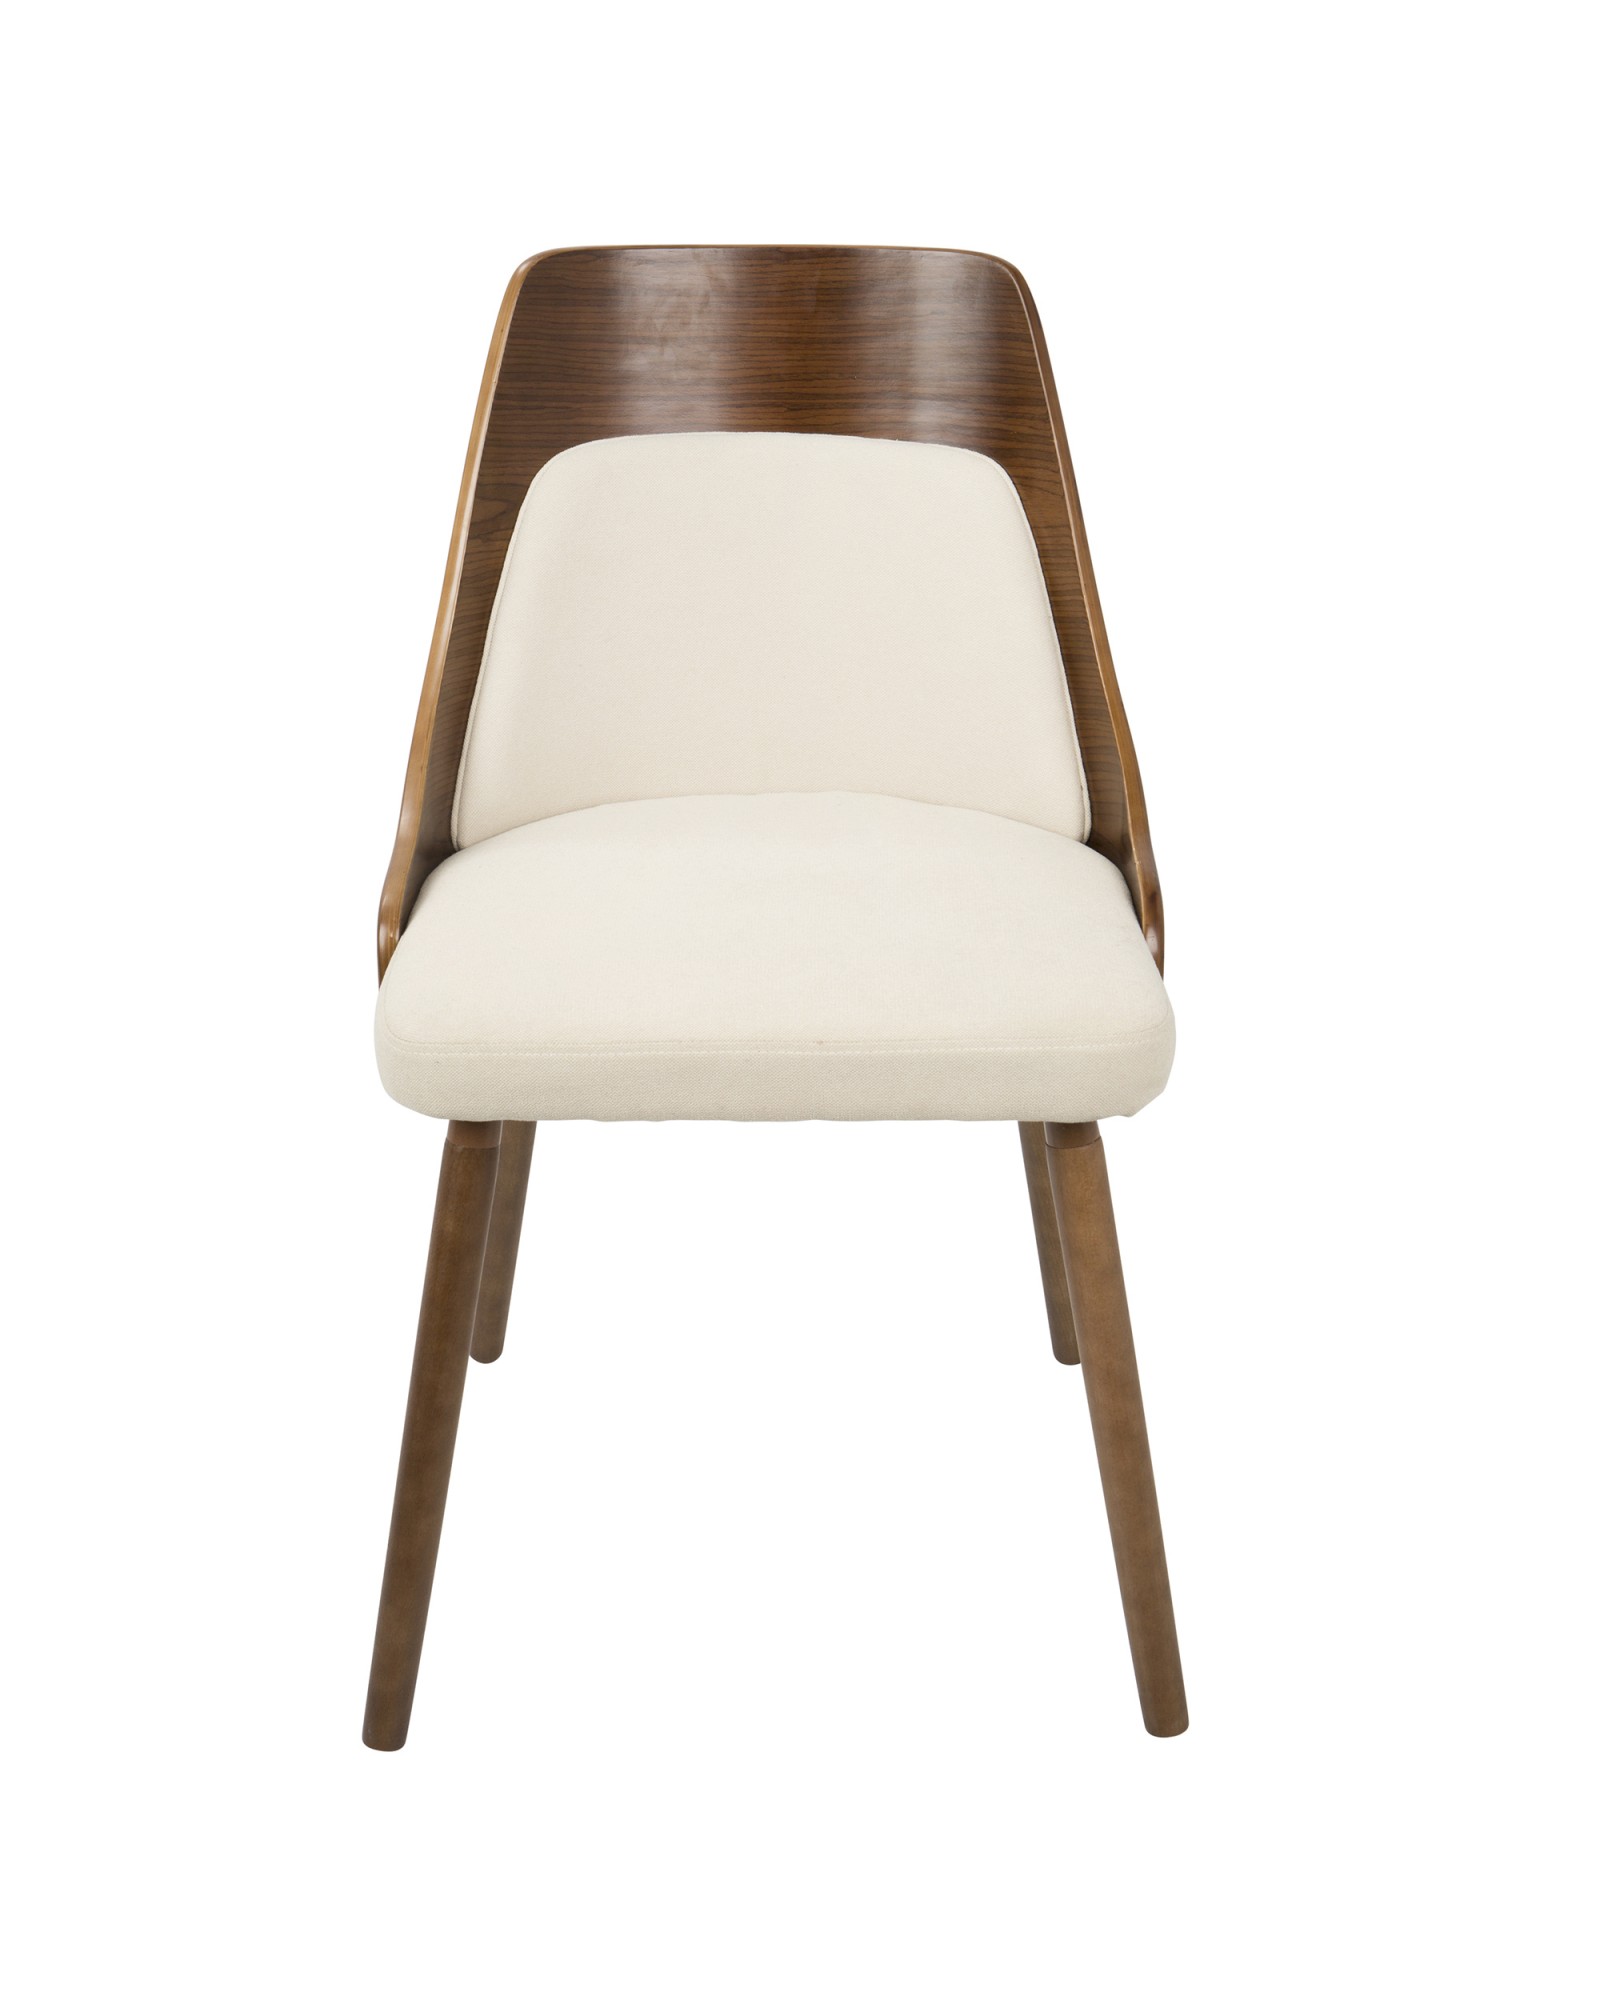 Anabelle Mid-Century Modern Dining/Accent Chair in Walnut and Cream Fabric